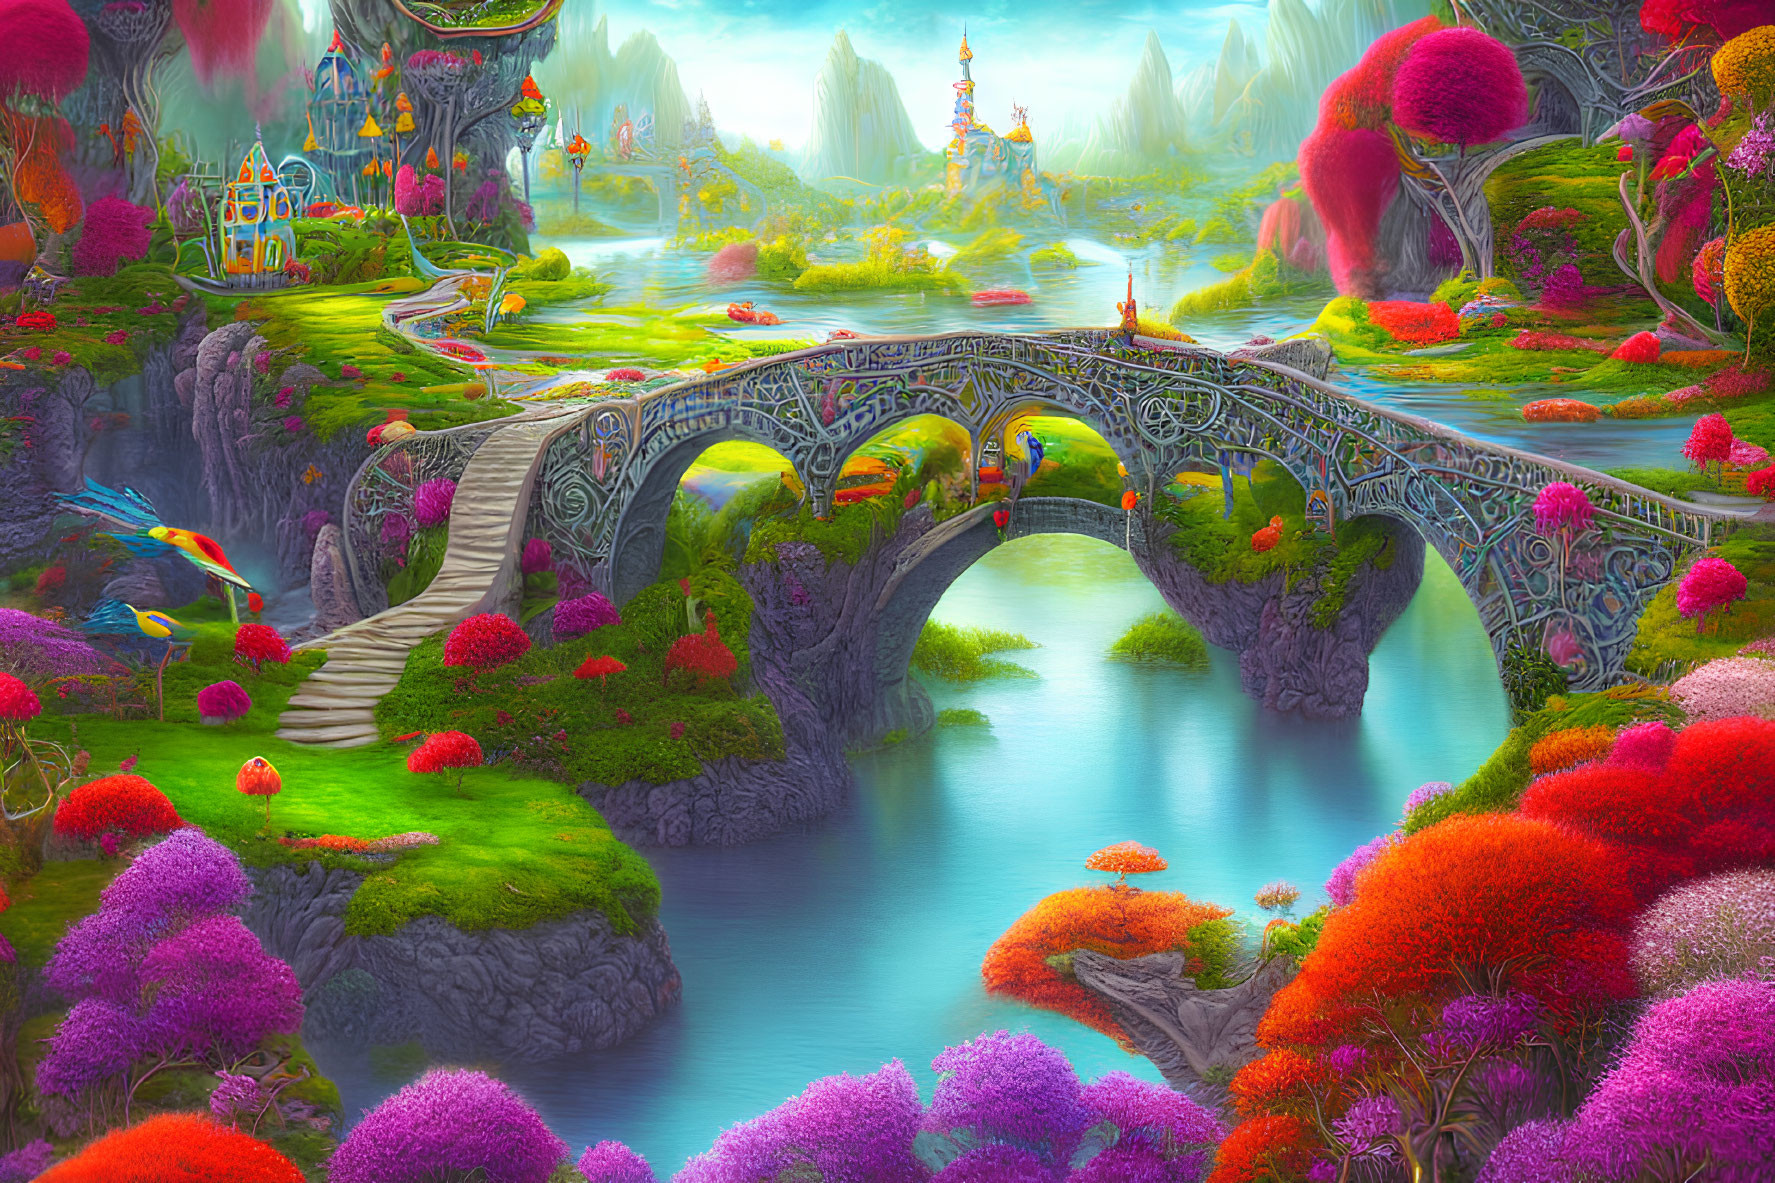 Vibrant fantasy landscape with colorful forest, ornate bridge, and whimsical castle